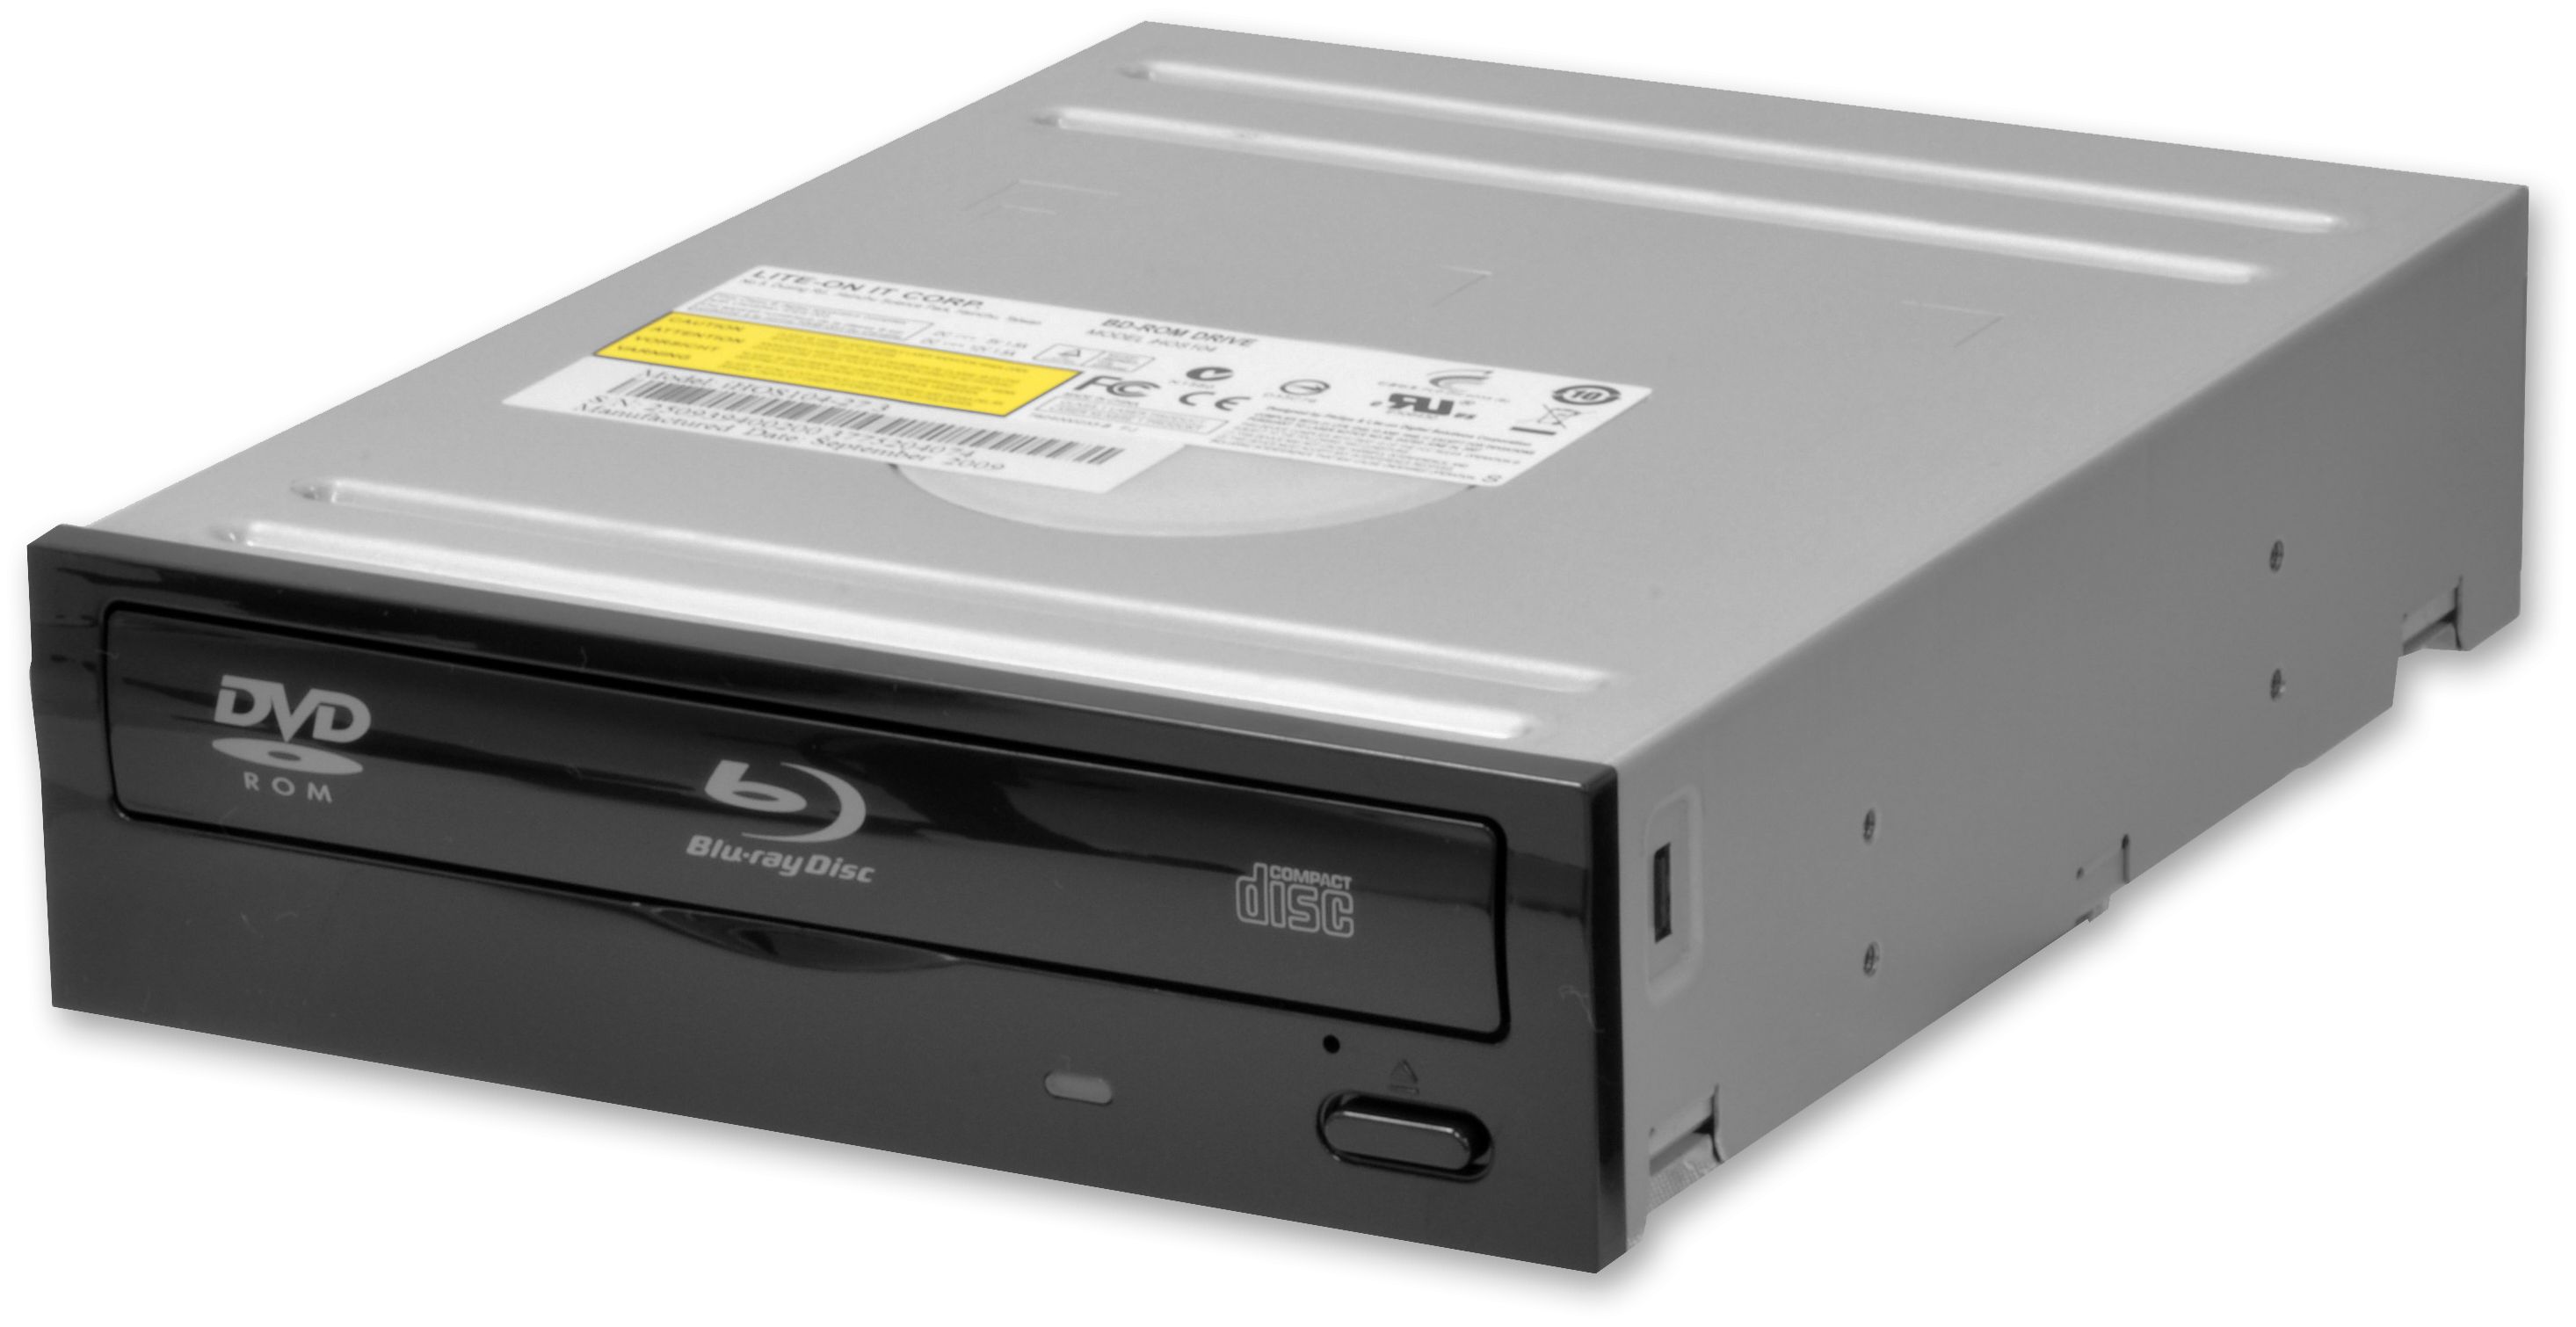 What Is An Optical Disc Drive?